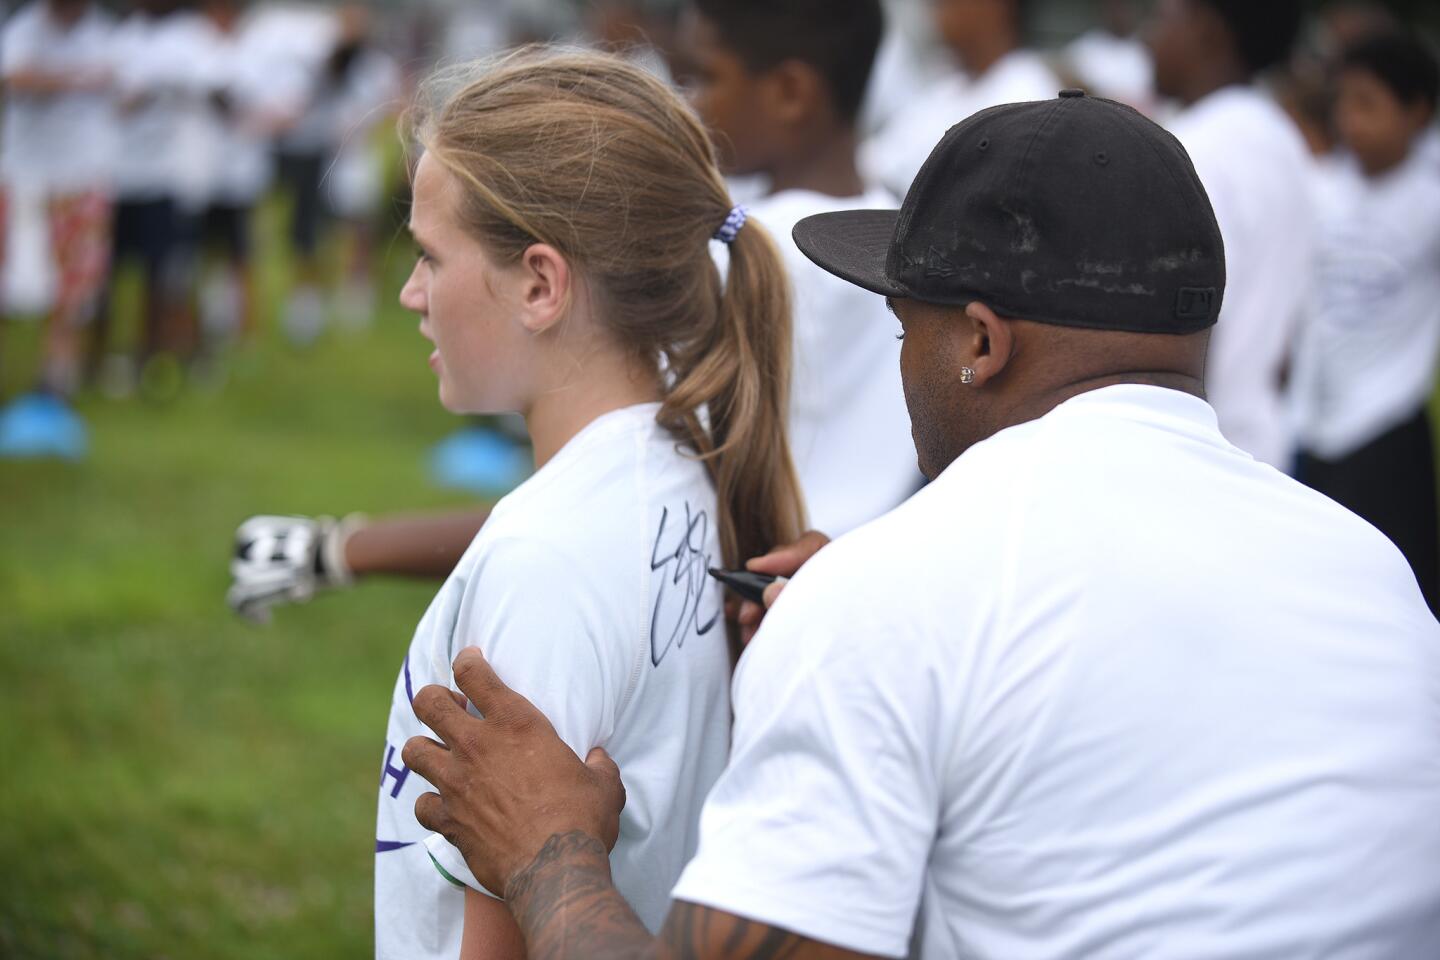 Ravens wide receiver Steve Smith autograph the T-shirt of football player Carlee Maltba during his football clinic at Owings Mills High School.